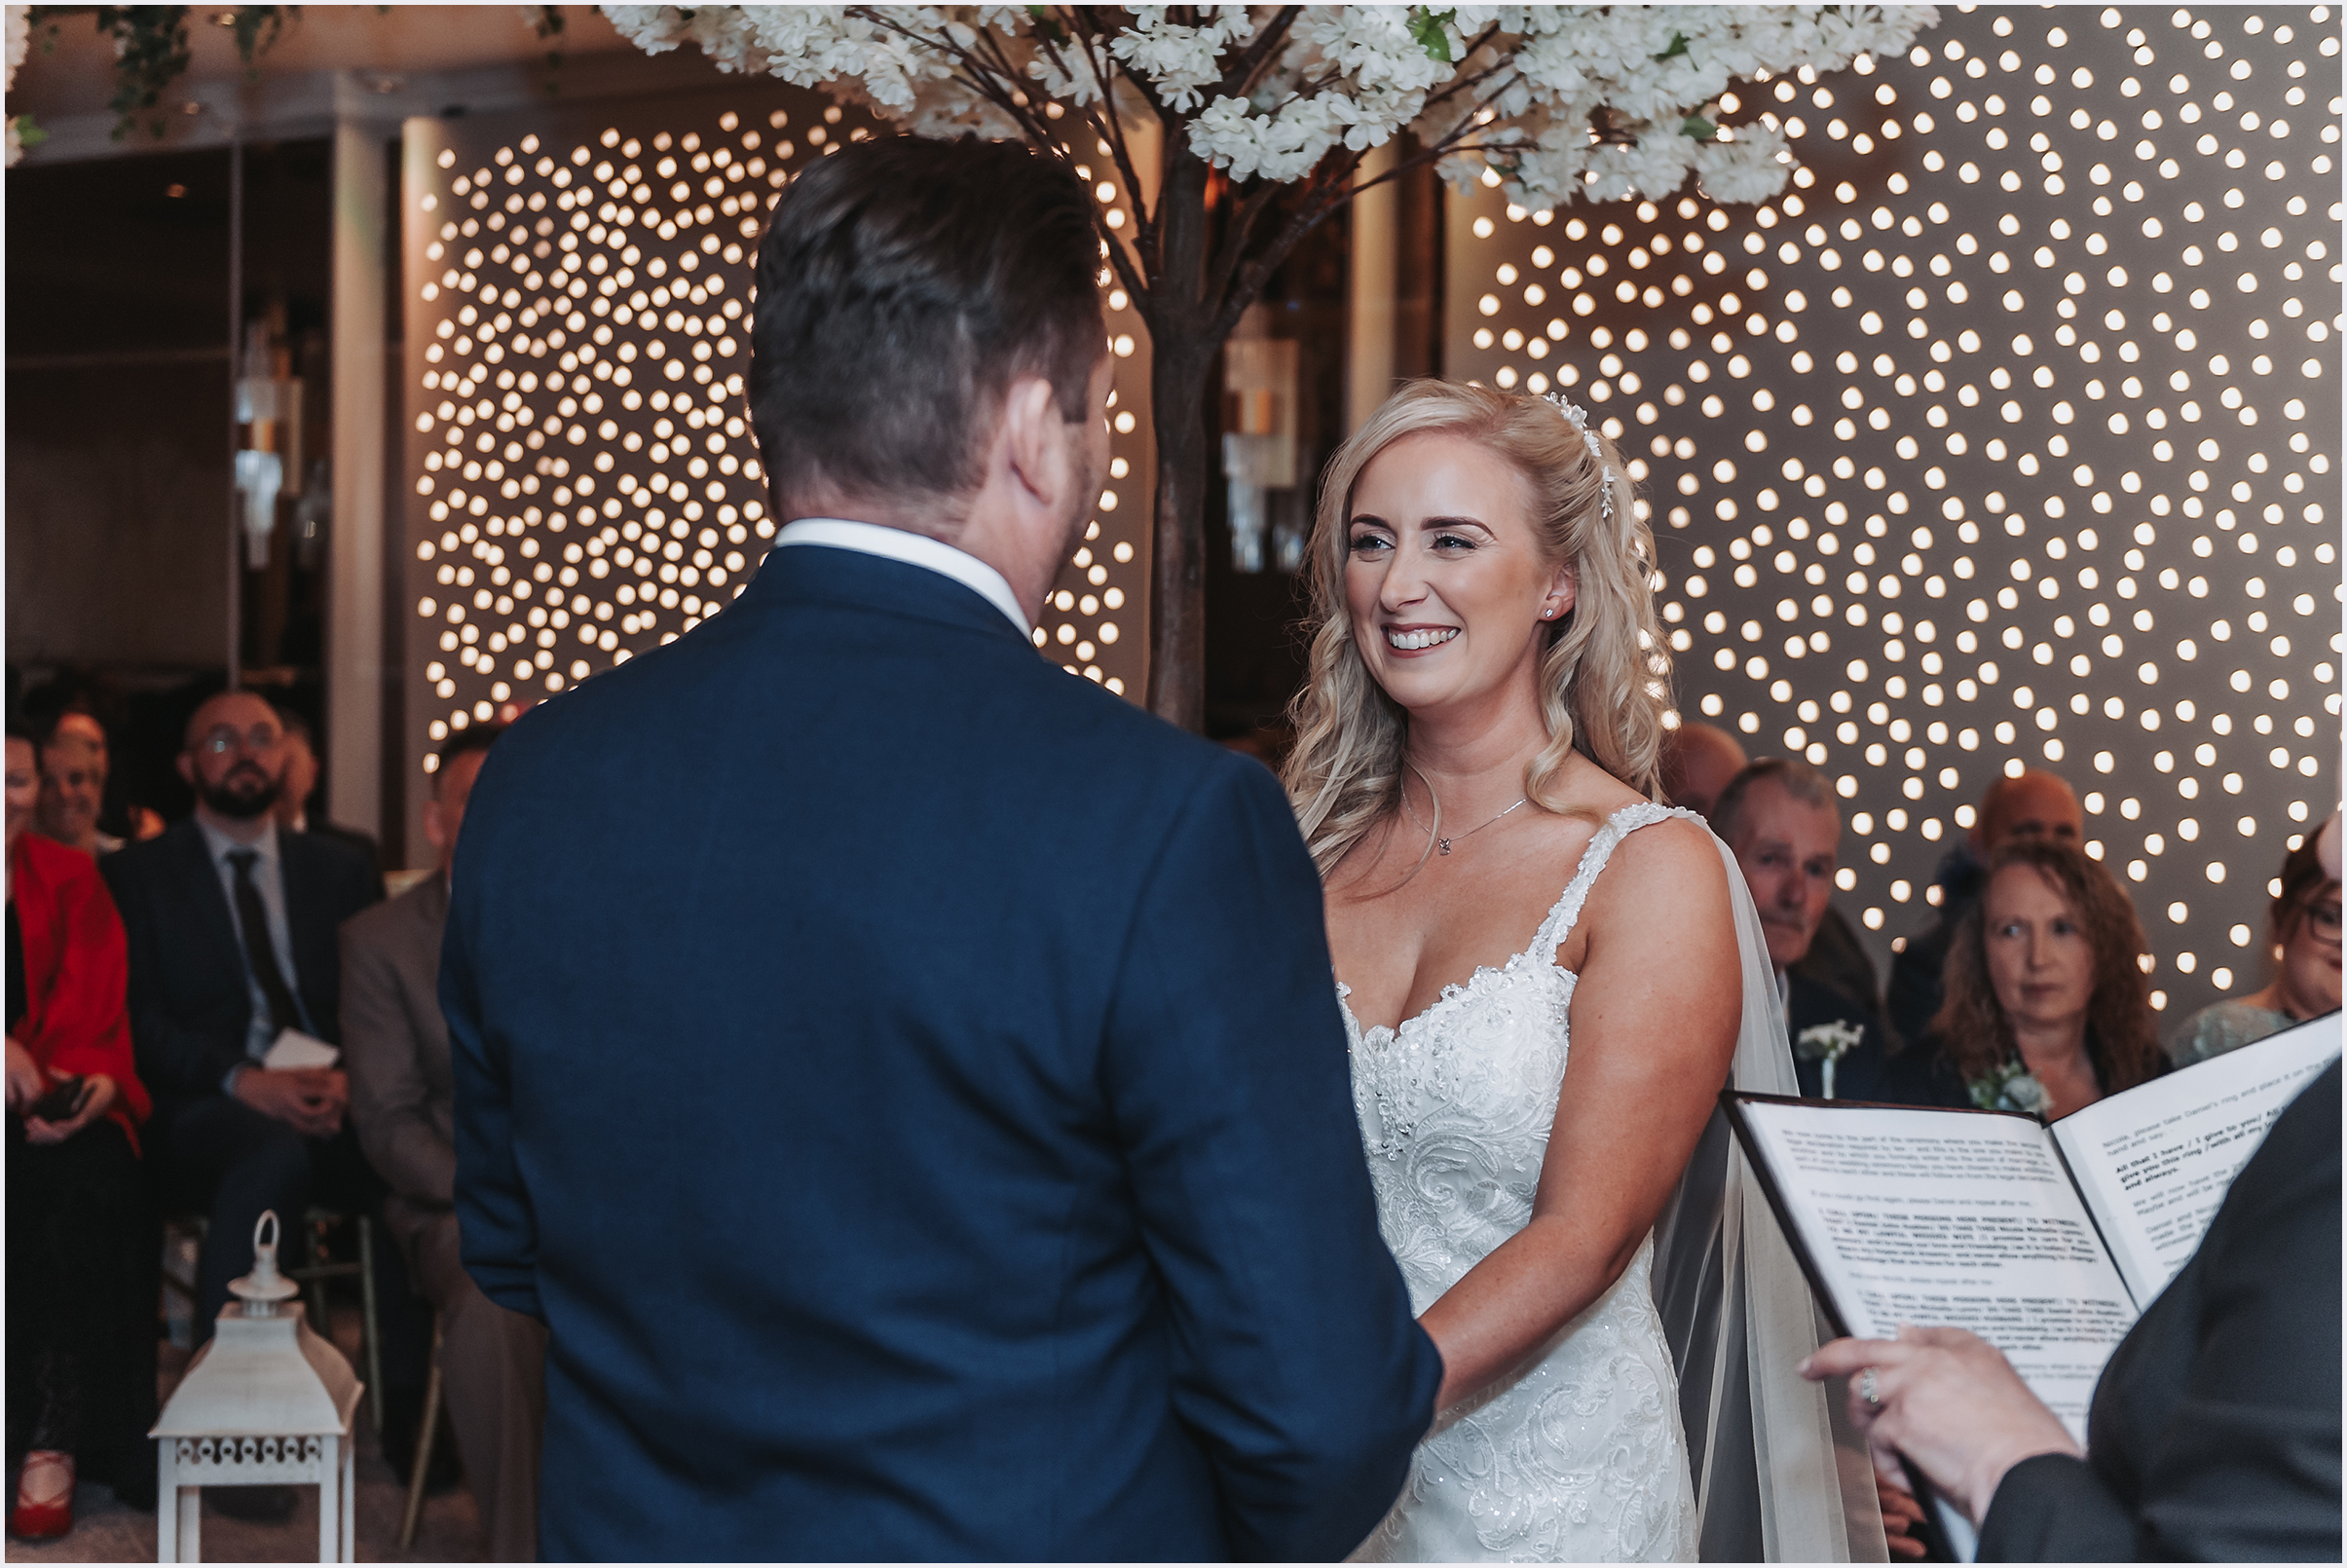 A bride smiling and her groom as they exchange vows during their wedding ceremony.  Image captured by Cheshire wedding Photographer Helena Jayne Photographer.